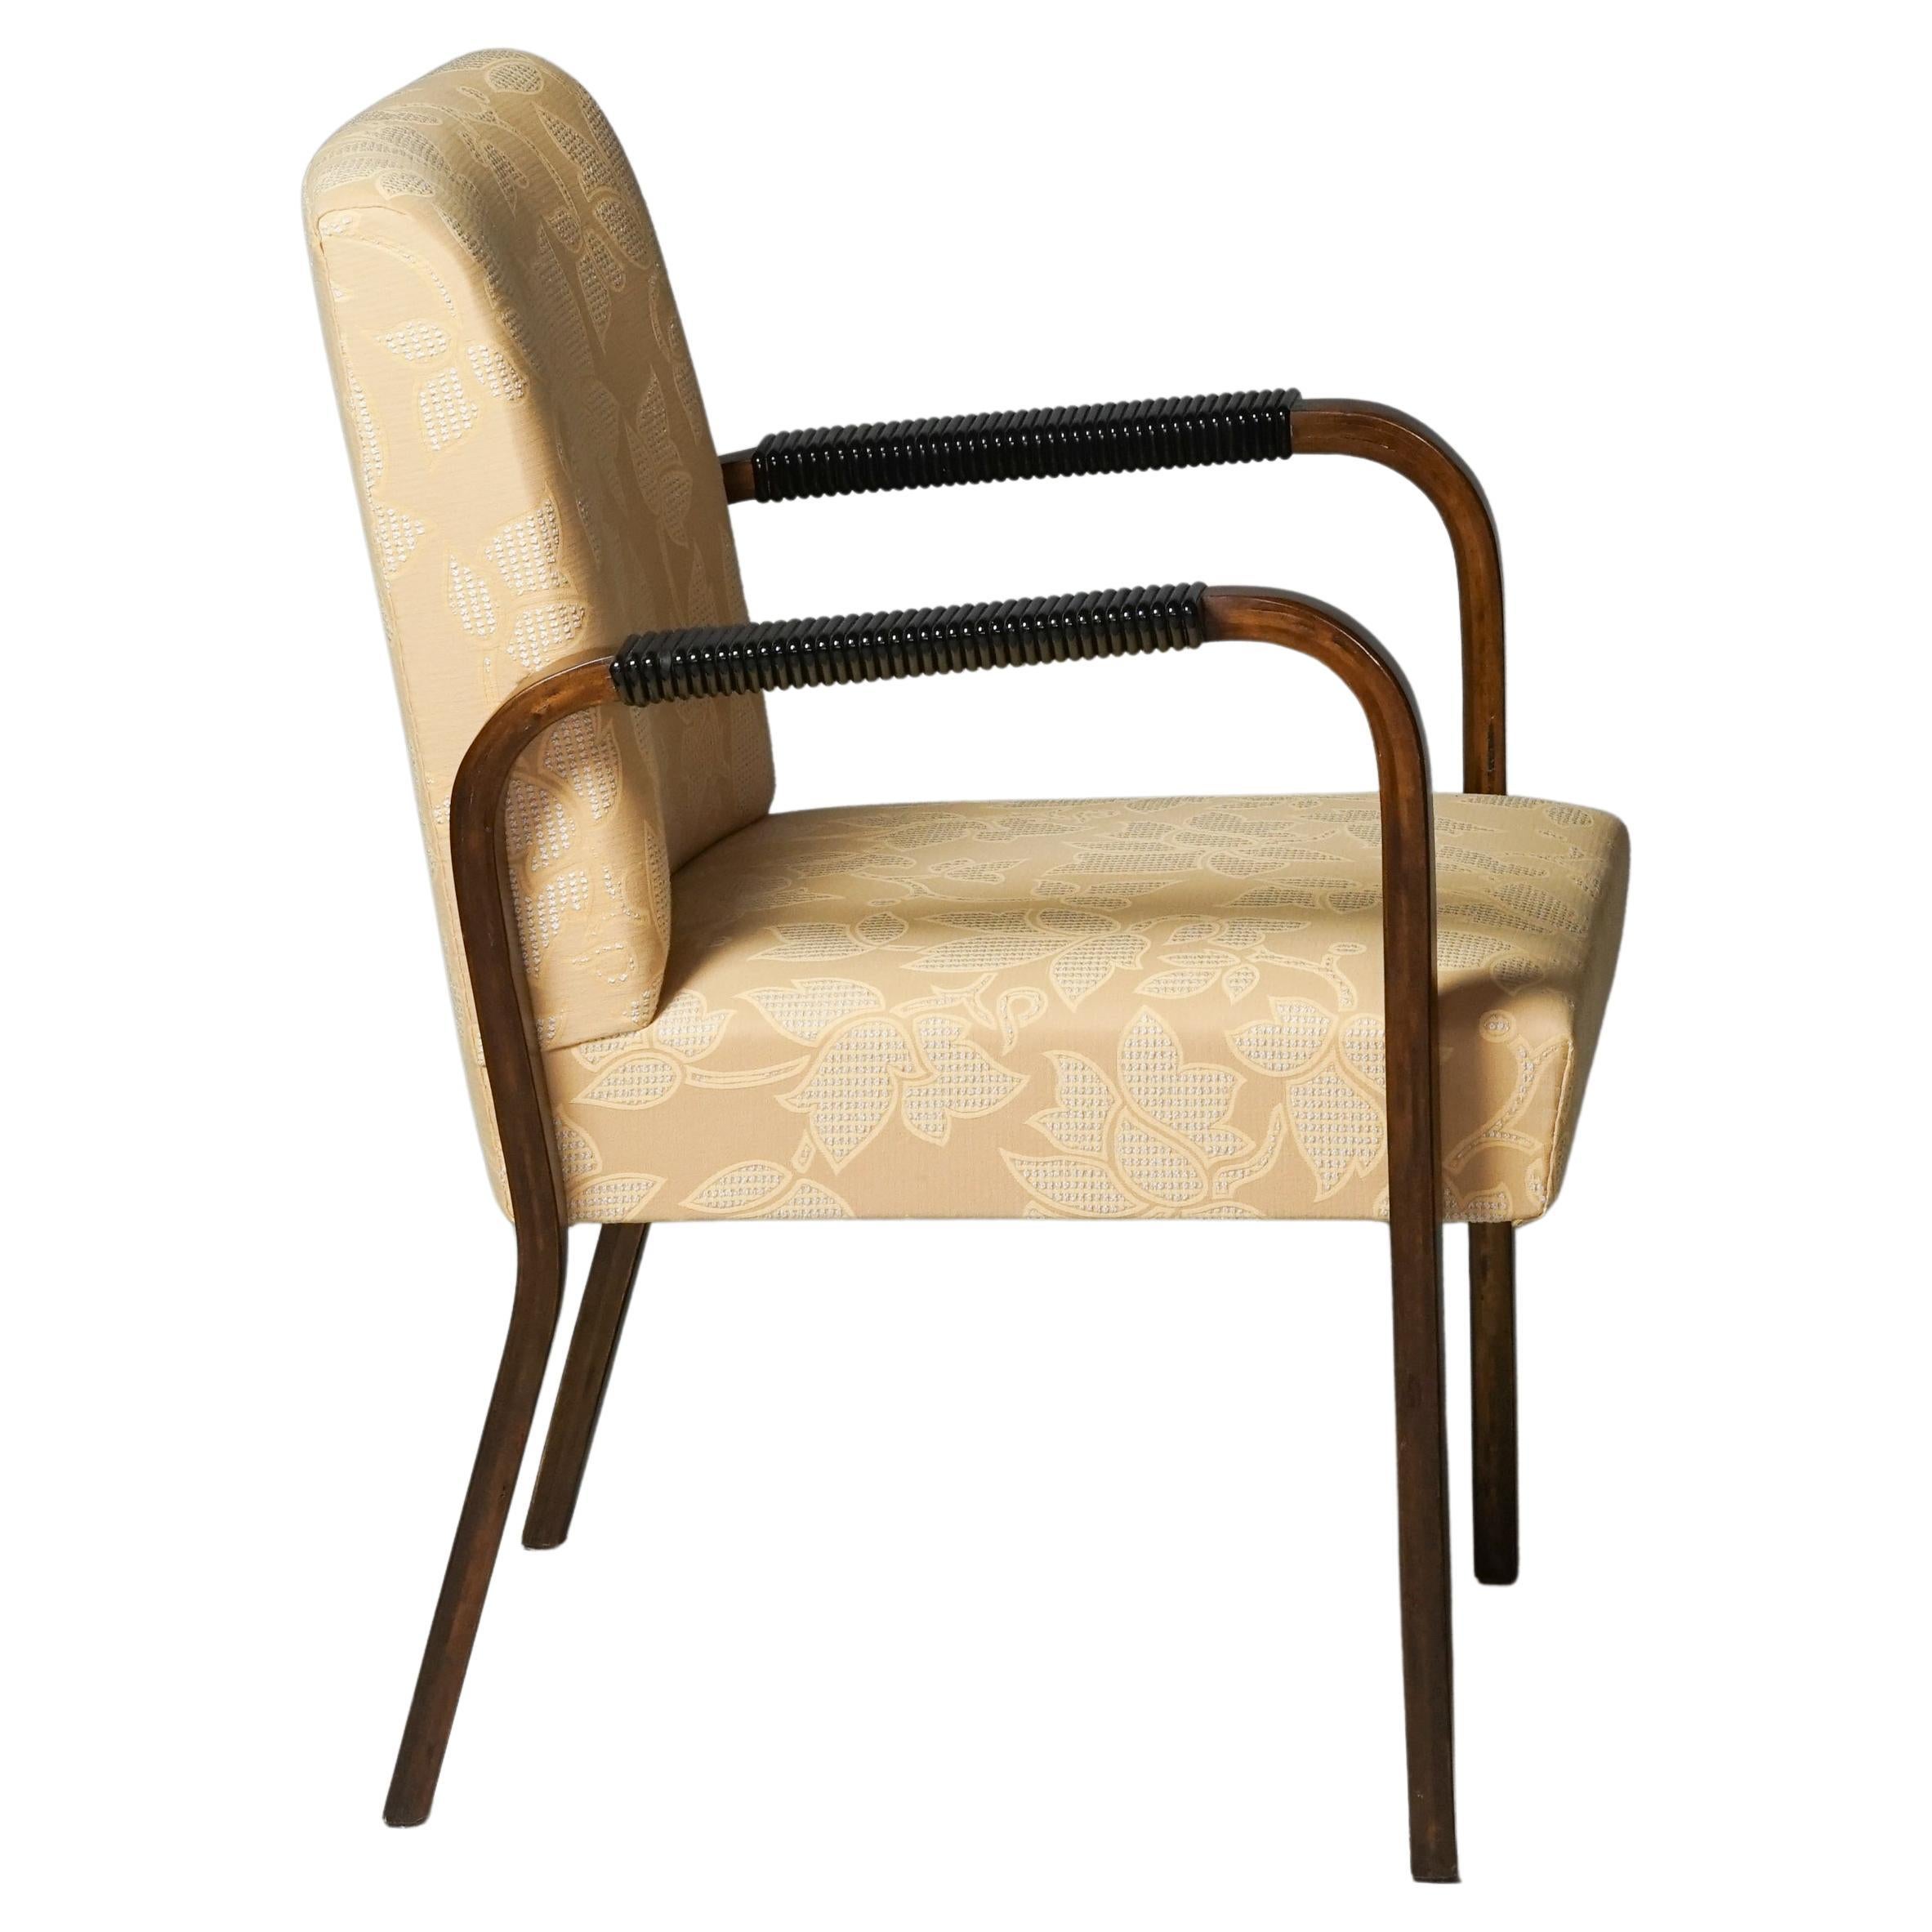 Model 46 Armchair with Floral Fabric, Alvar Aalto, 1930/1940s For Sale